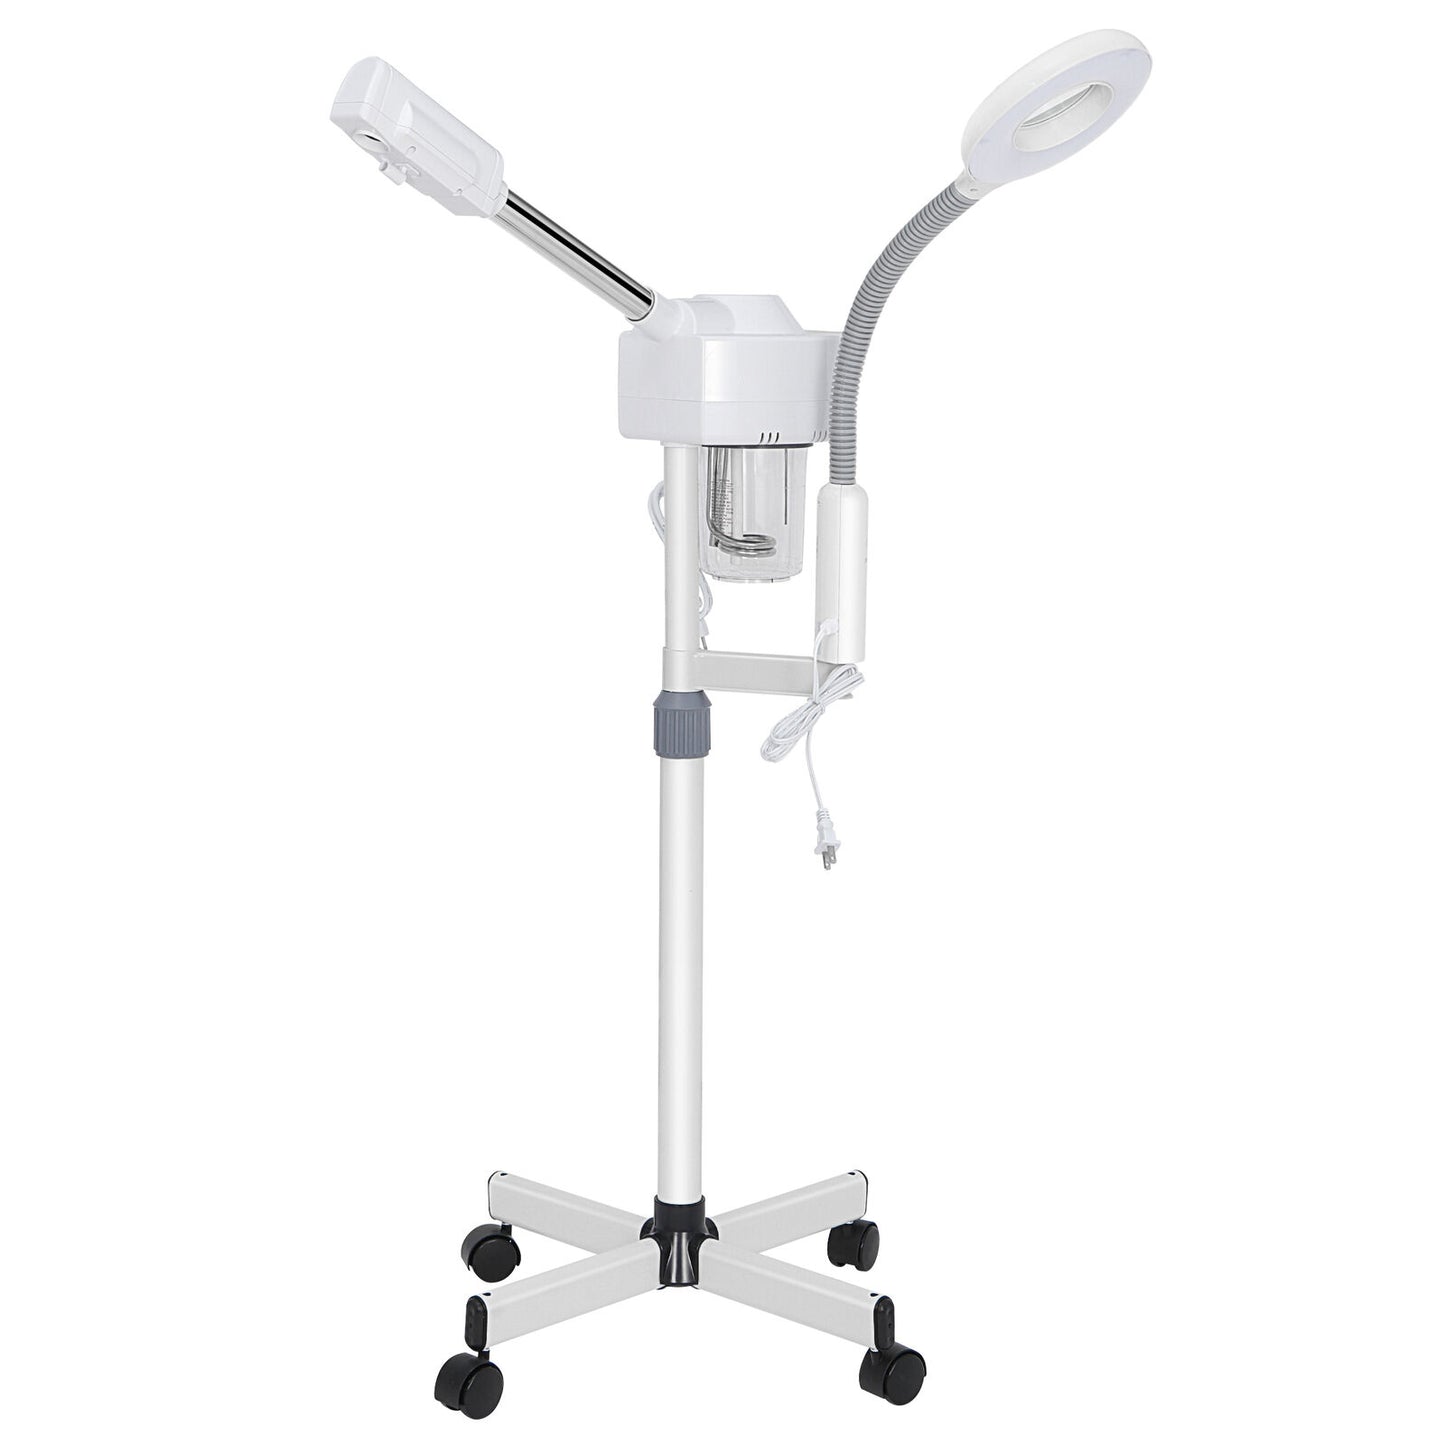 2In1 Facial Steamer 5x Clamp Magnifying Lamp Hot Ozone Machine Spa Salon Beauty